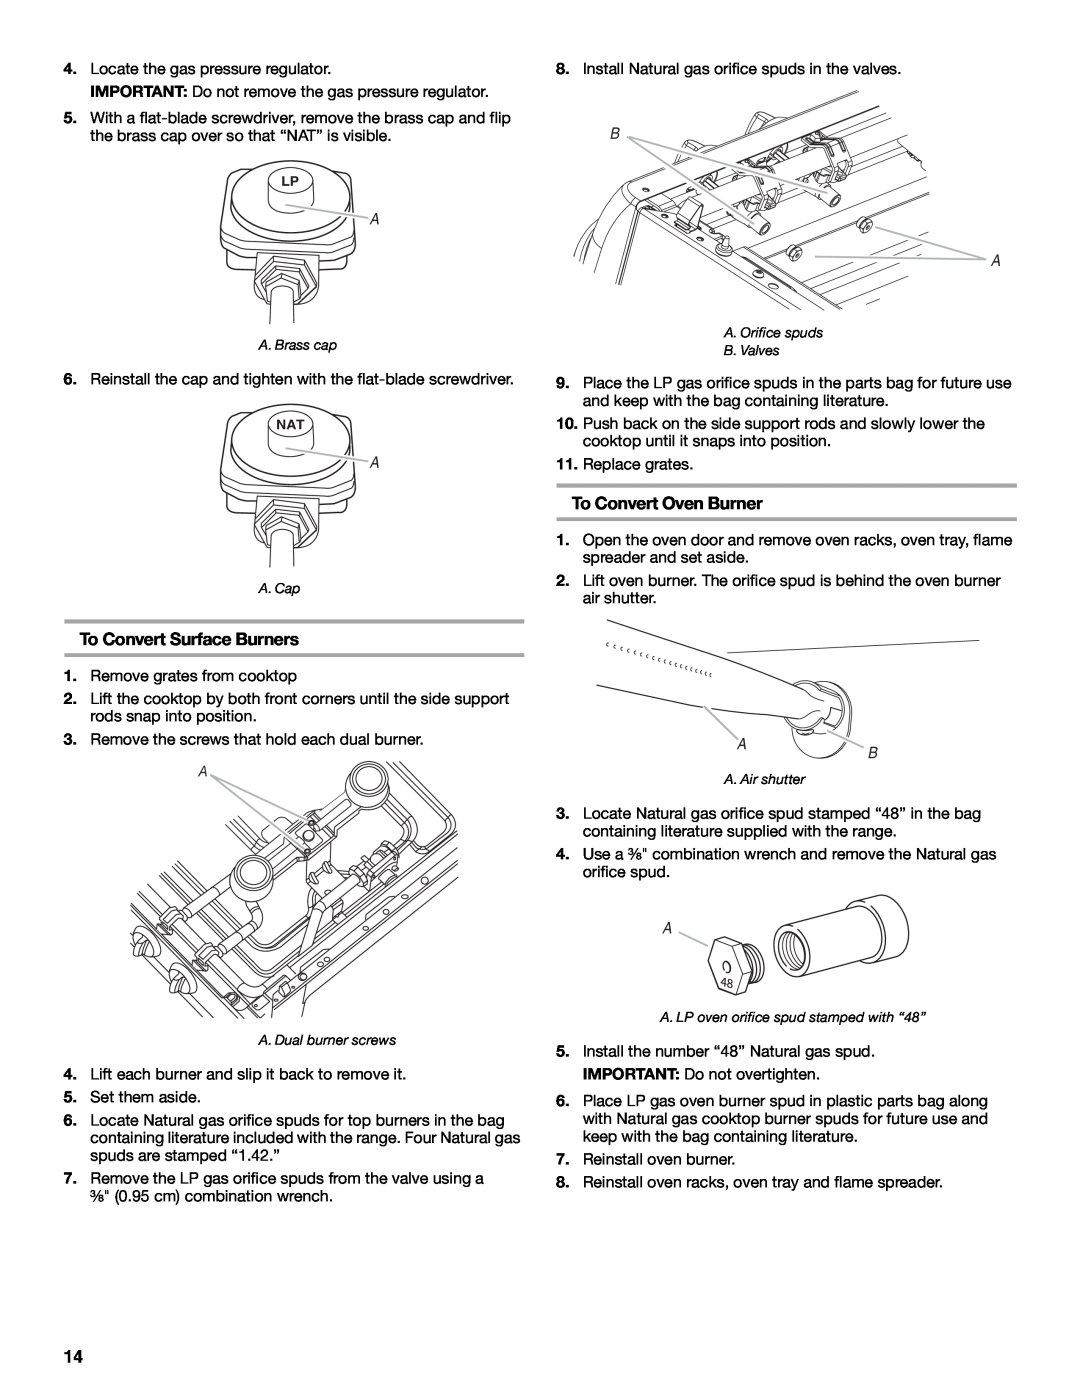 Whirlpool W10325493A installation instructions To Convert Oven Burner, To Convert Surface Burners 